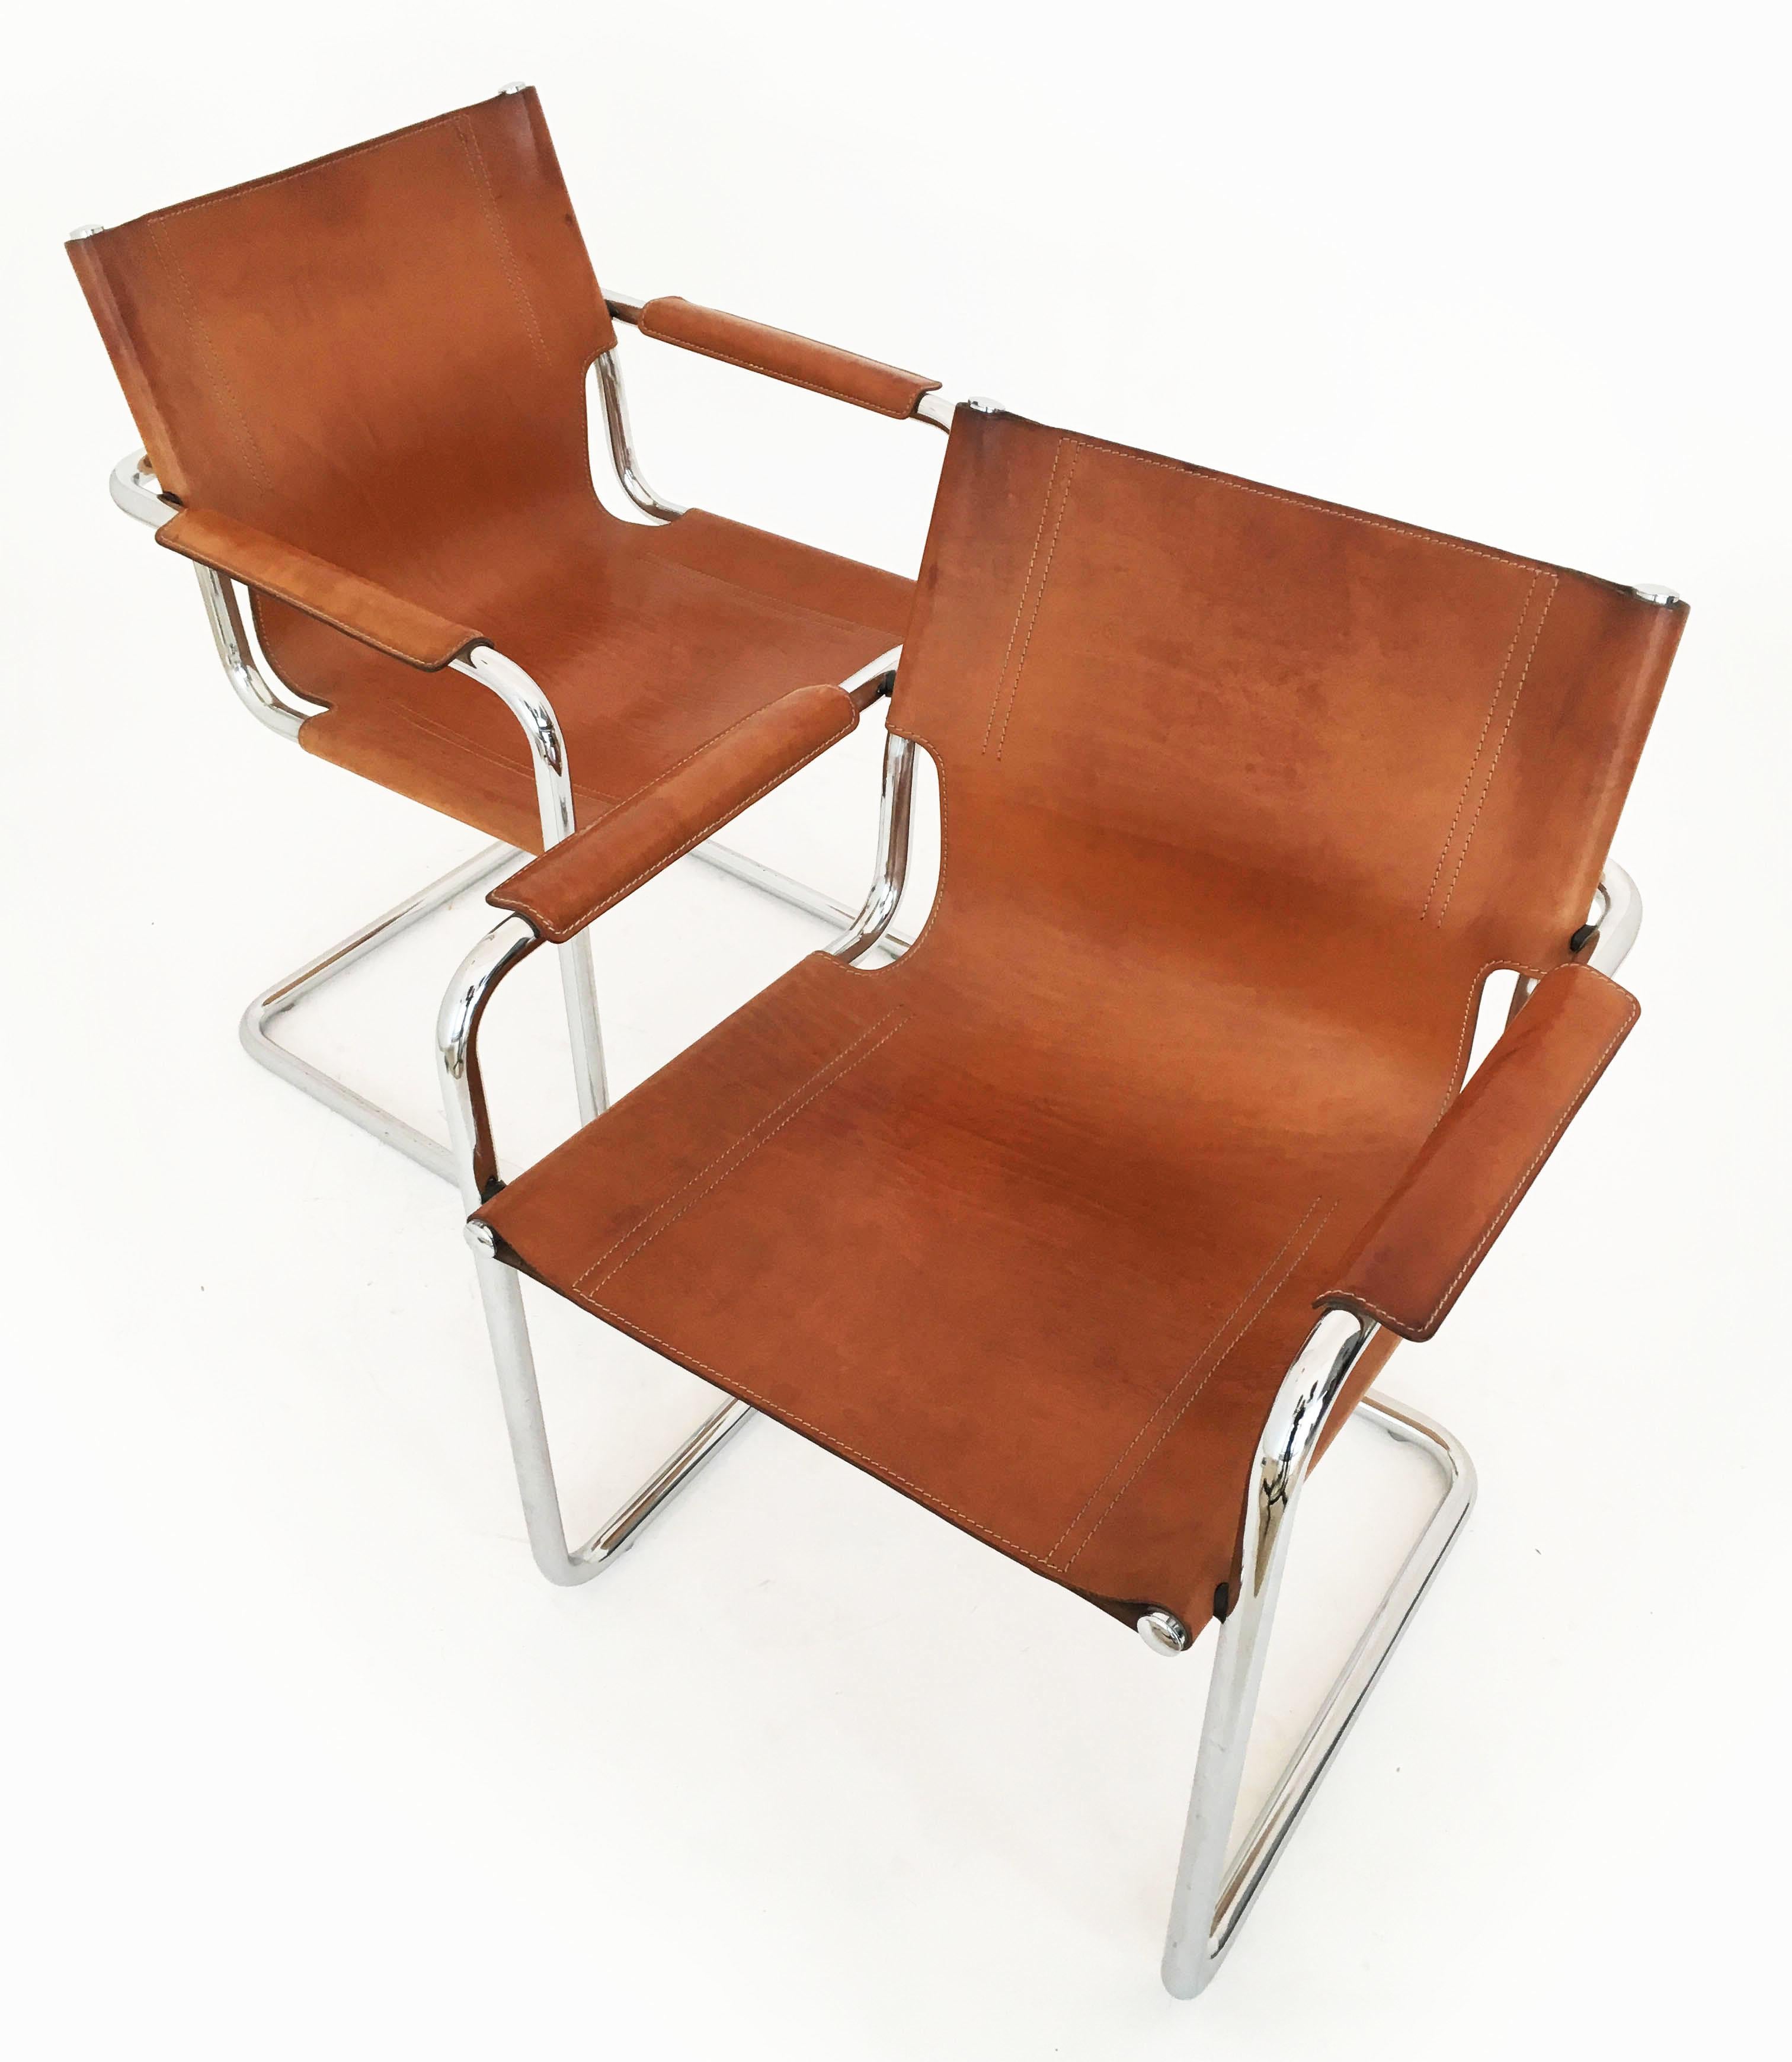 A fantastic pair Matteo Grassi 'Visitor' chairs in original beautifully aged patinated cognac leather, Italy 1970s. Signed embossed leather, Matteo Grassi.